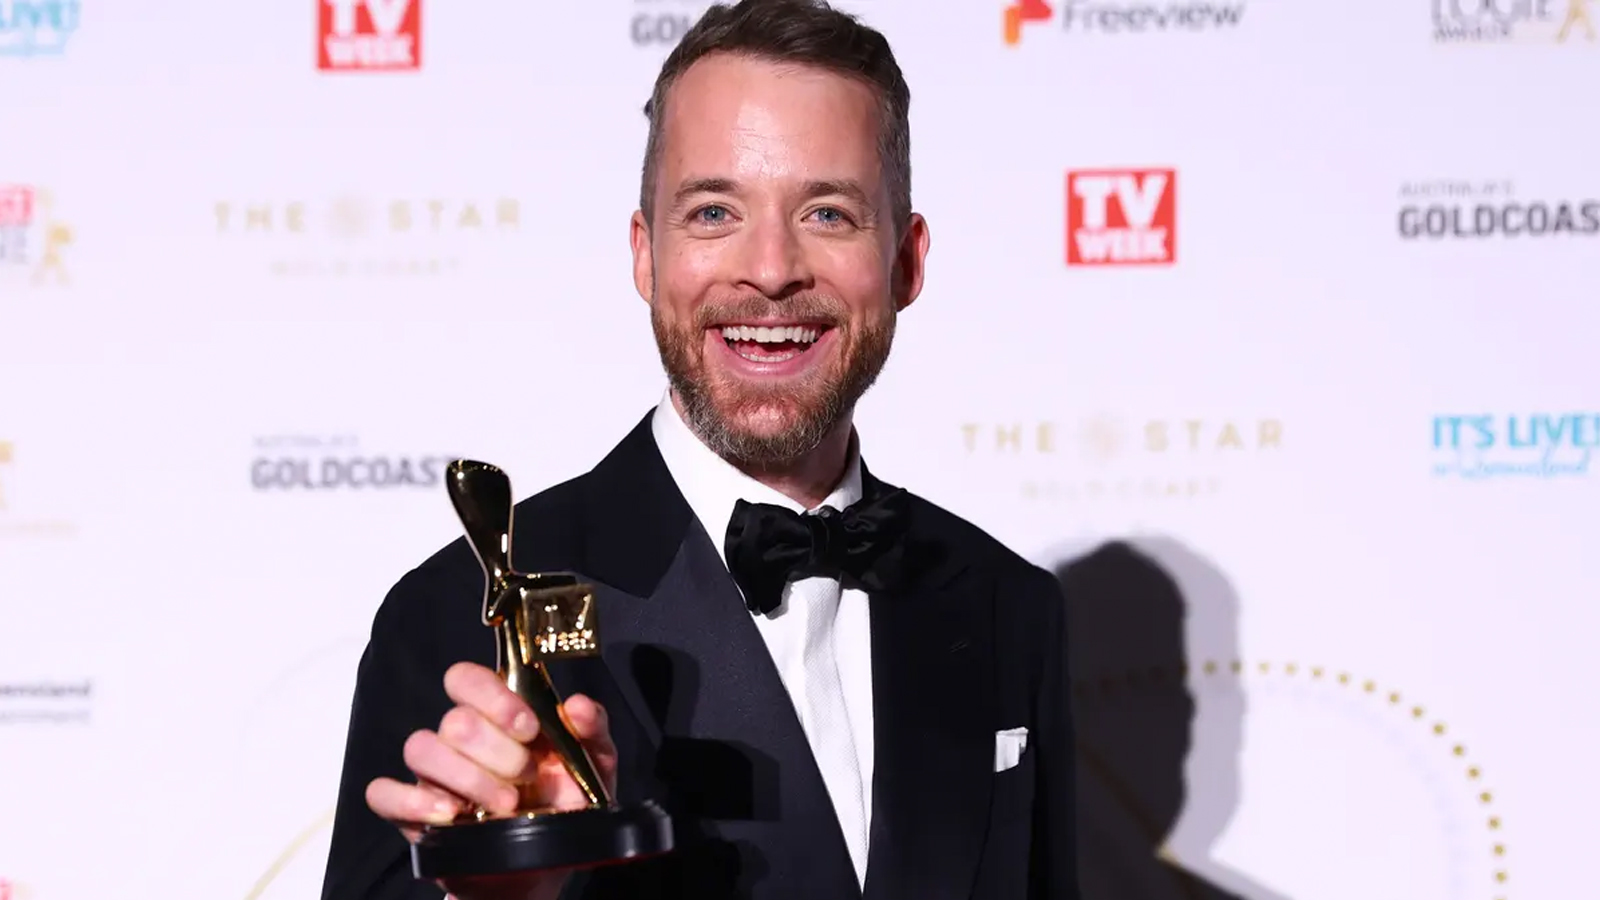 Hamish Blake Is A Bloke More Australian Men Should Aspire To Be Like (Sorry Andy)